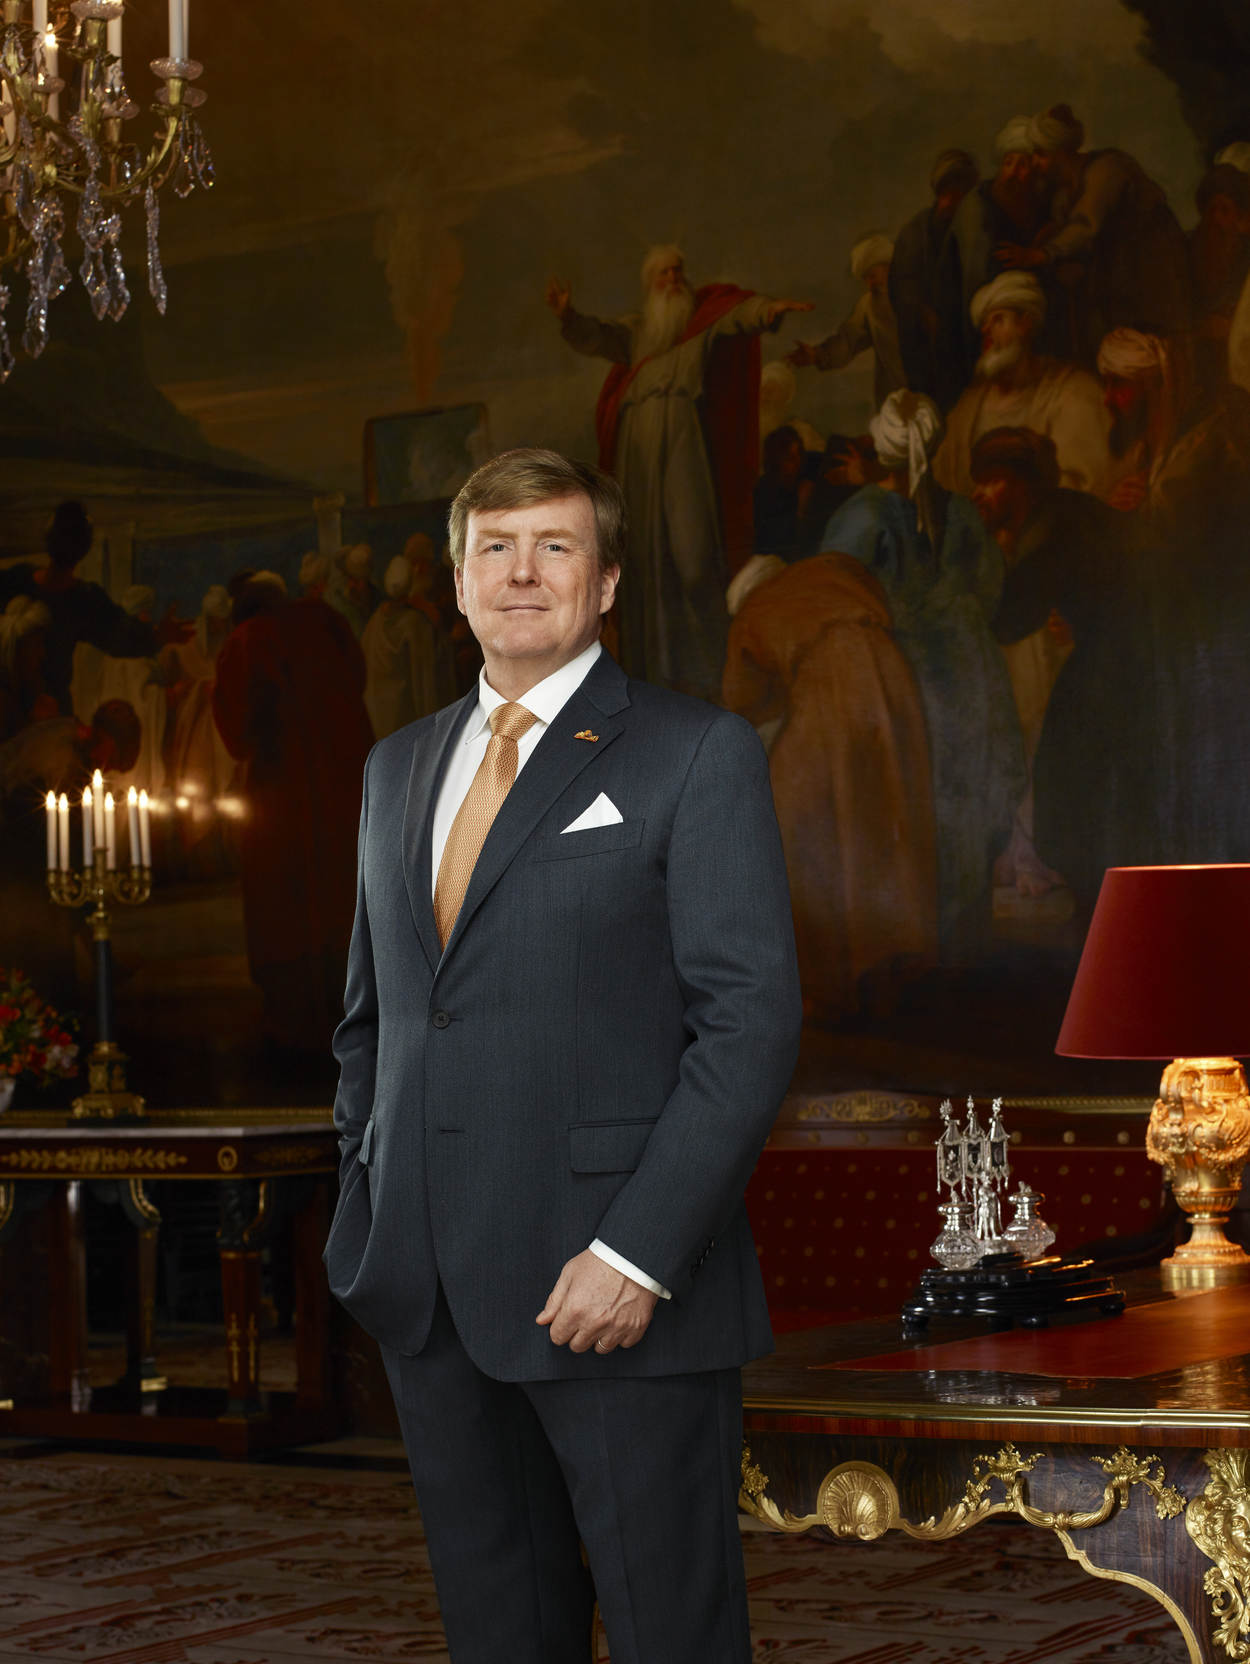 Photographs Of King Willem Alexander Photos Royal House Of The Netherlands